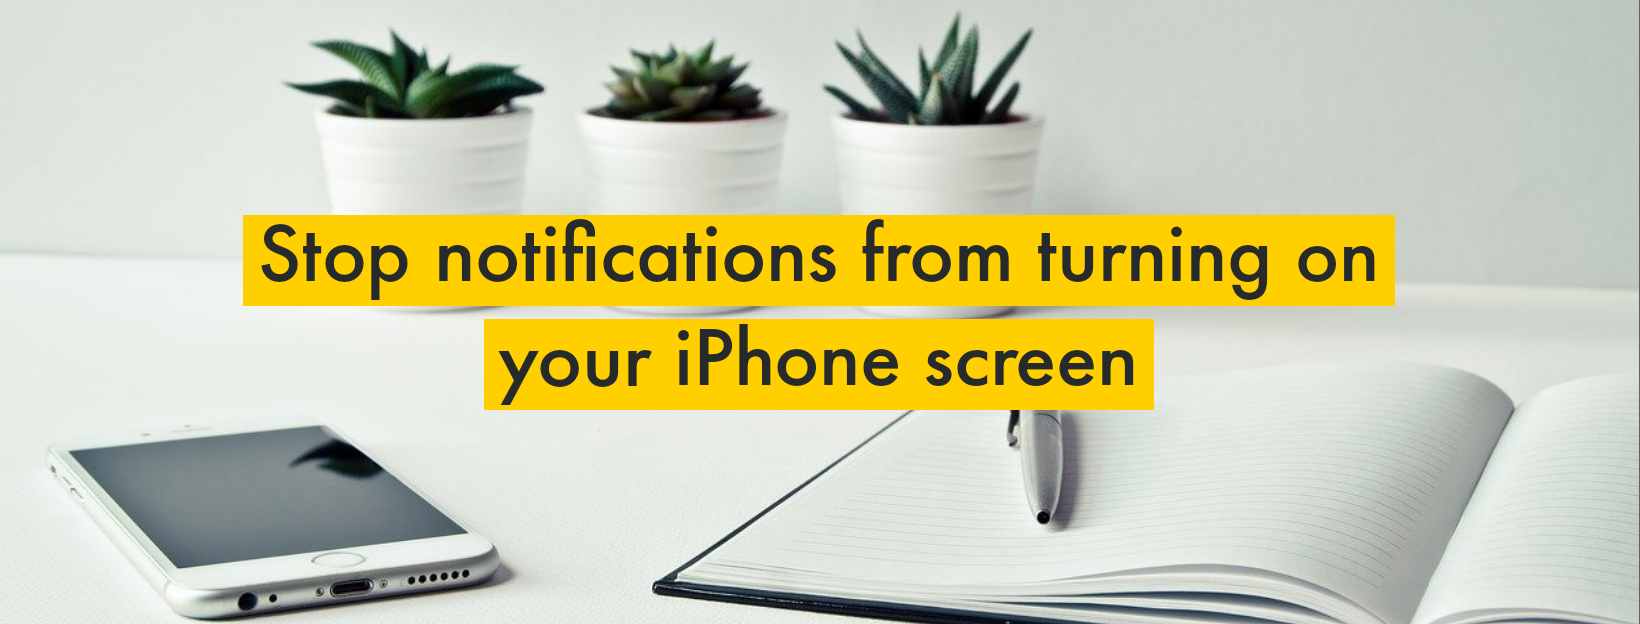 Stop Notifications from Turning on your iPhone Screen